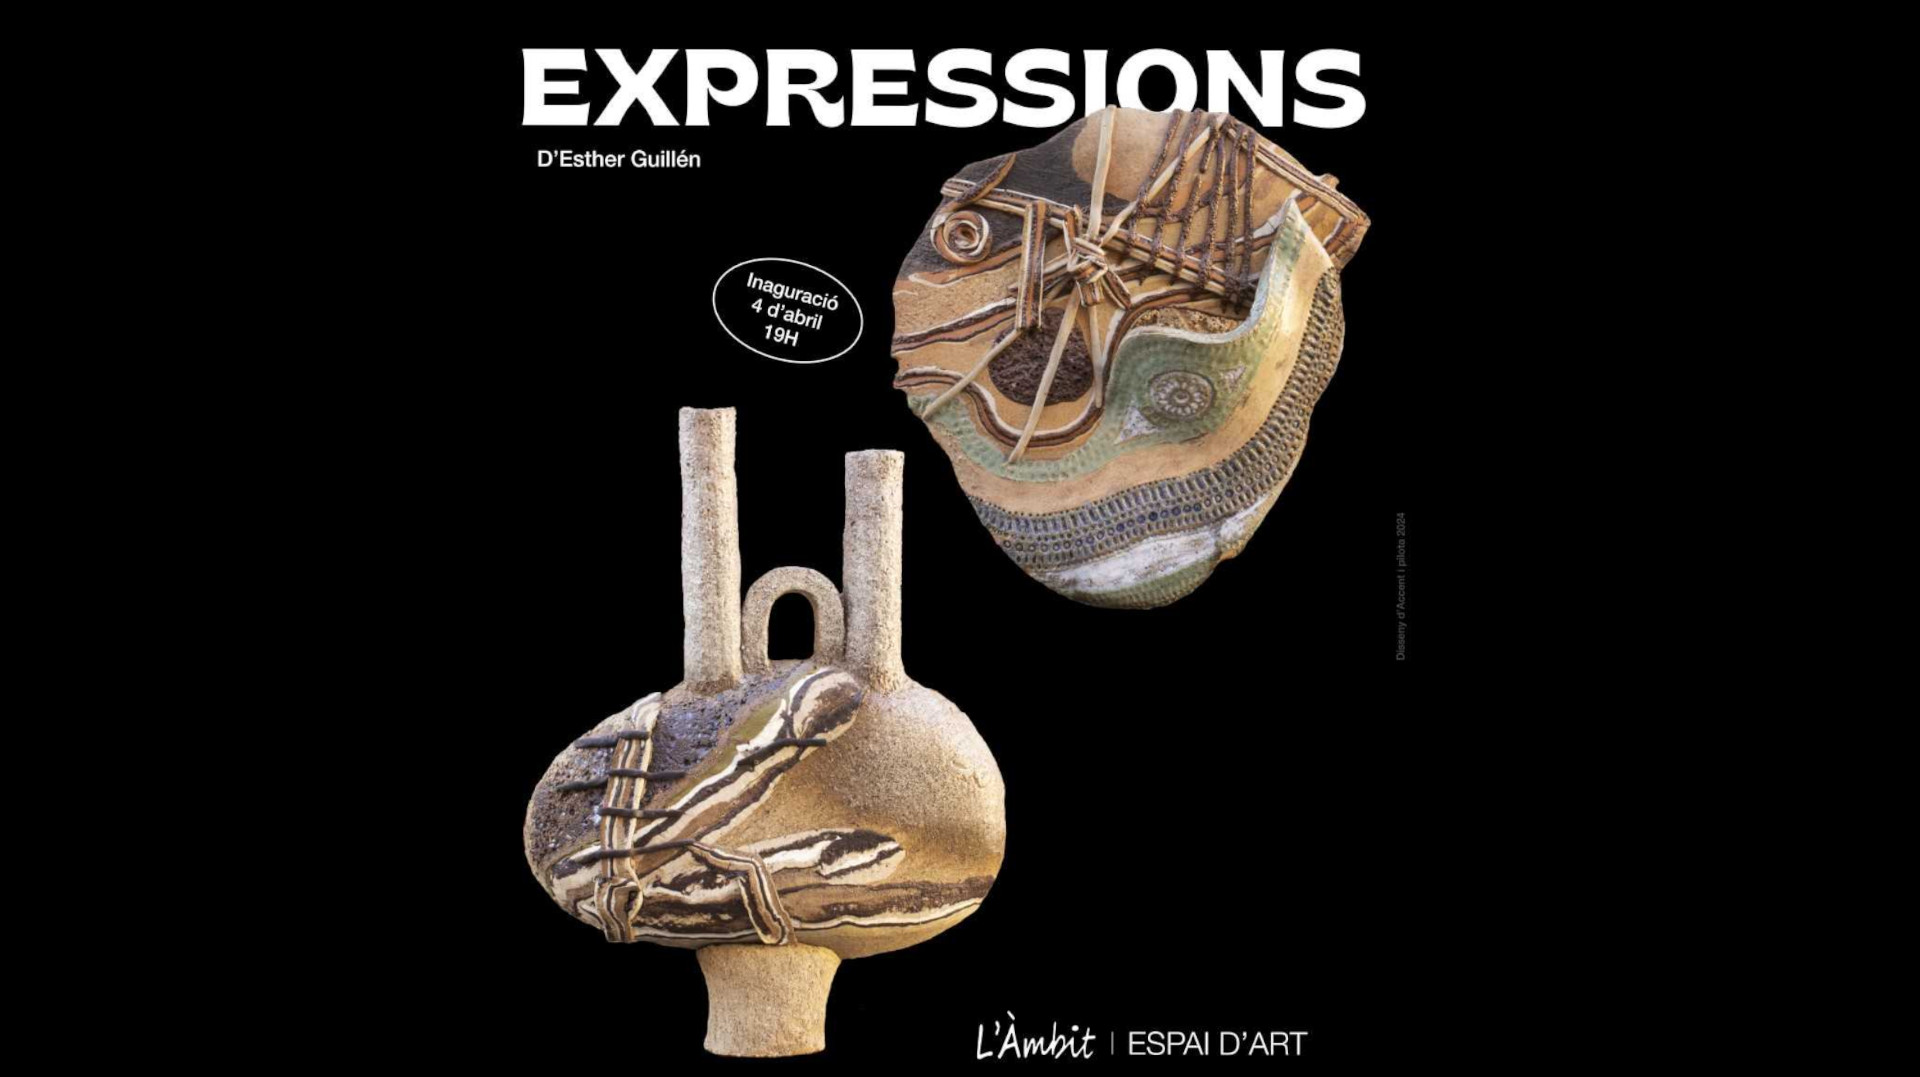 “Expressions”